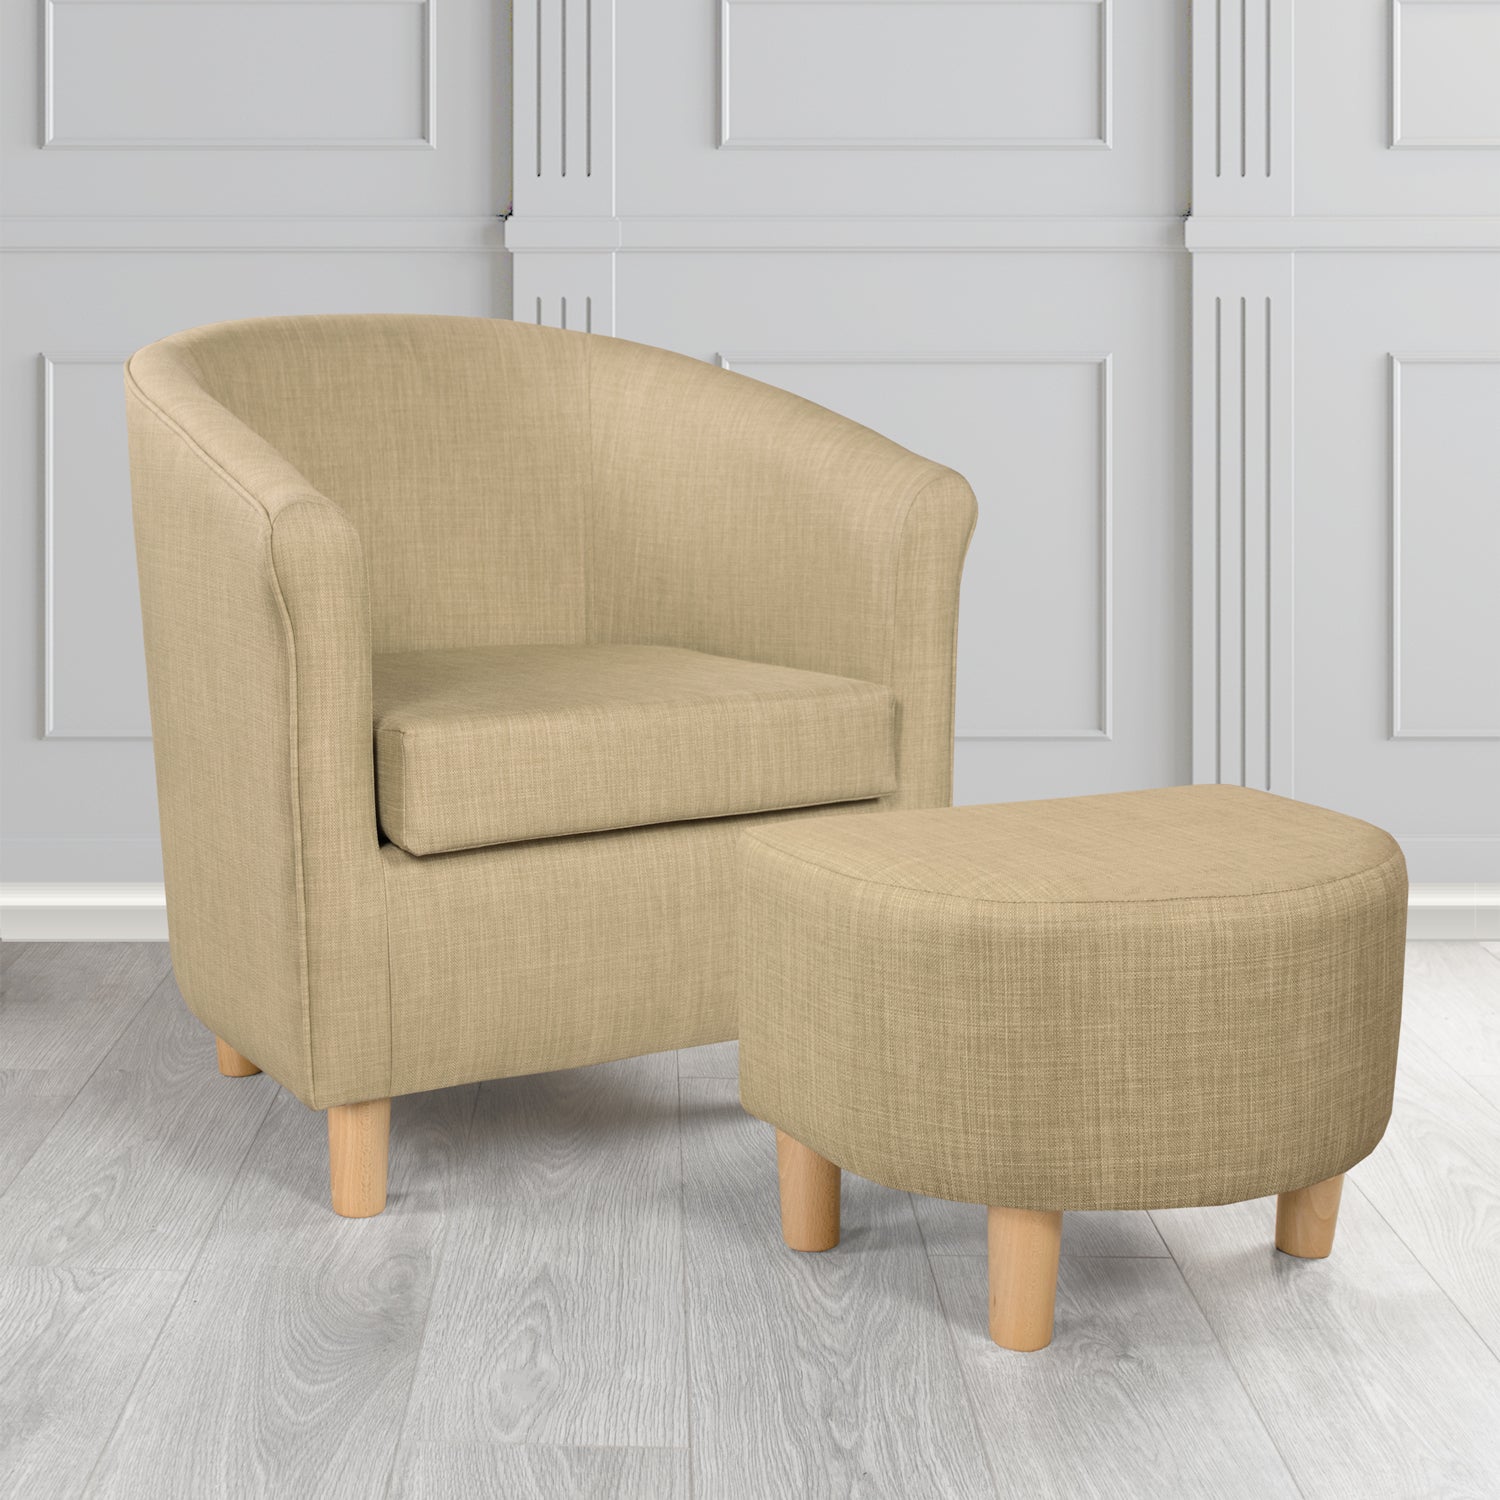 Tuscany Charles Mink Linen Plain Fabric Tub Chair with Dee Footstool Set - The Tub Chair Shop